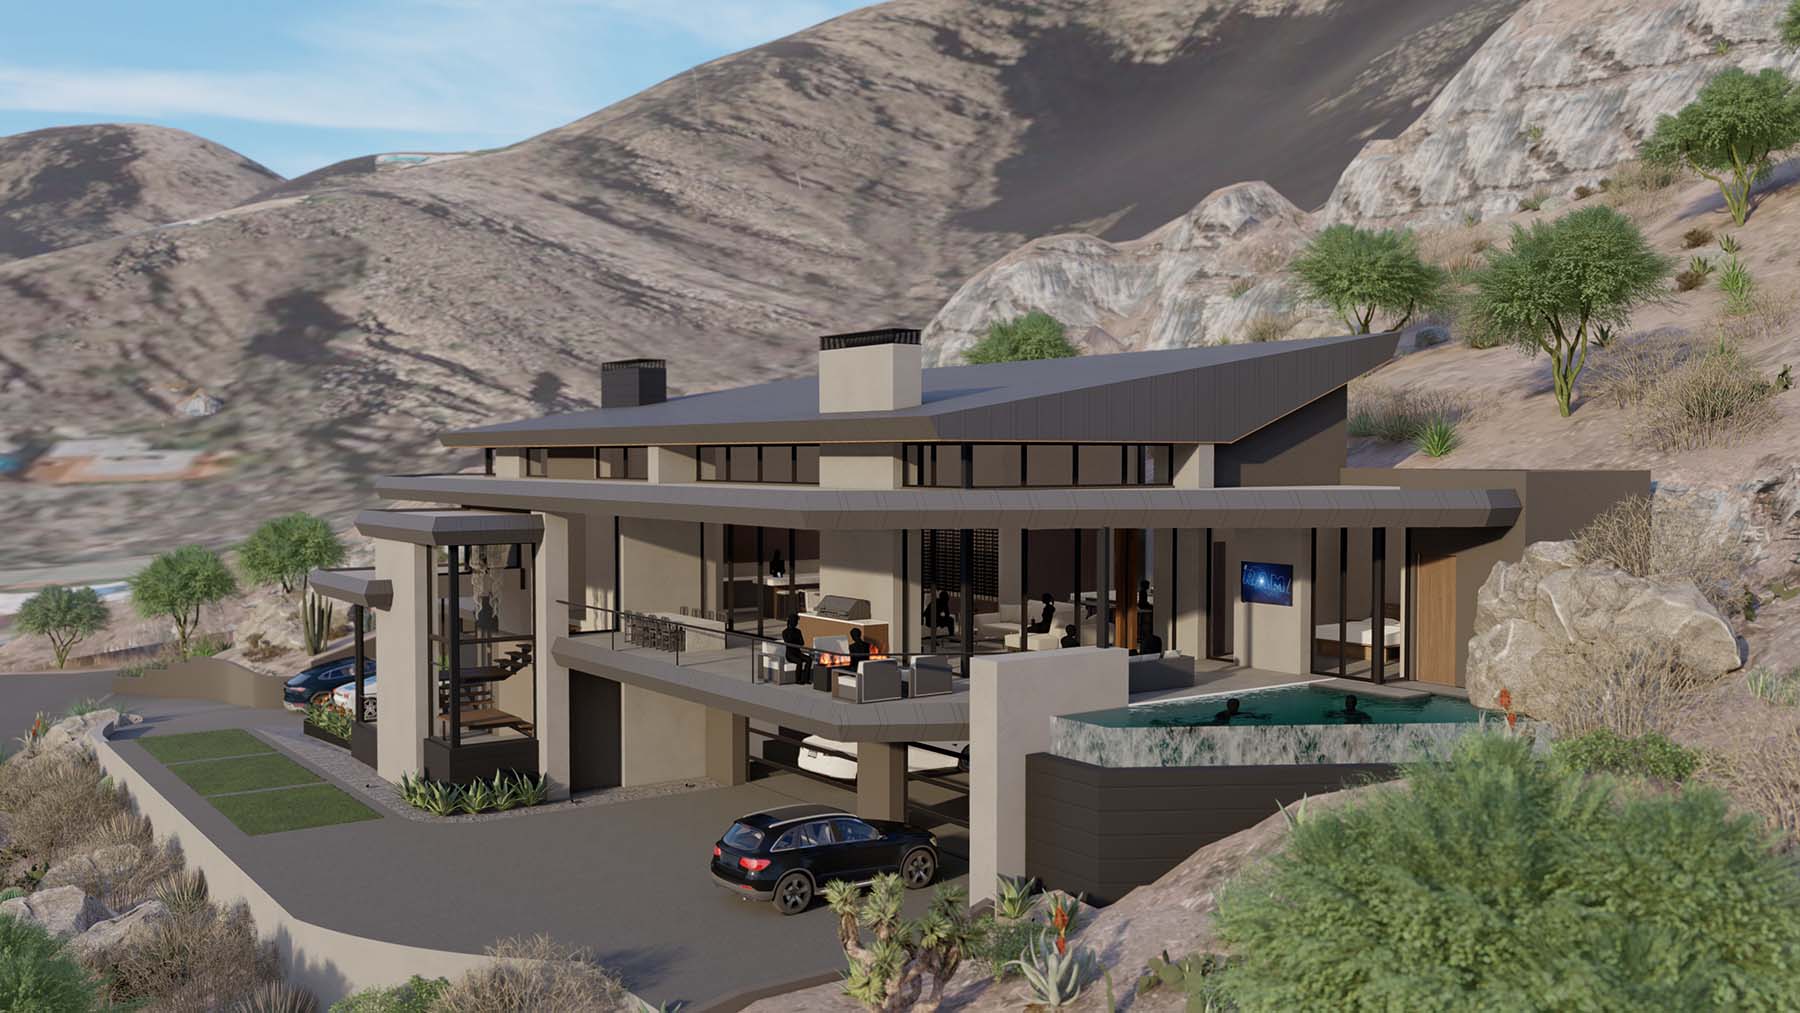 Set within the side of a mountain, this home was designed for indoor/outdoor living.